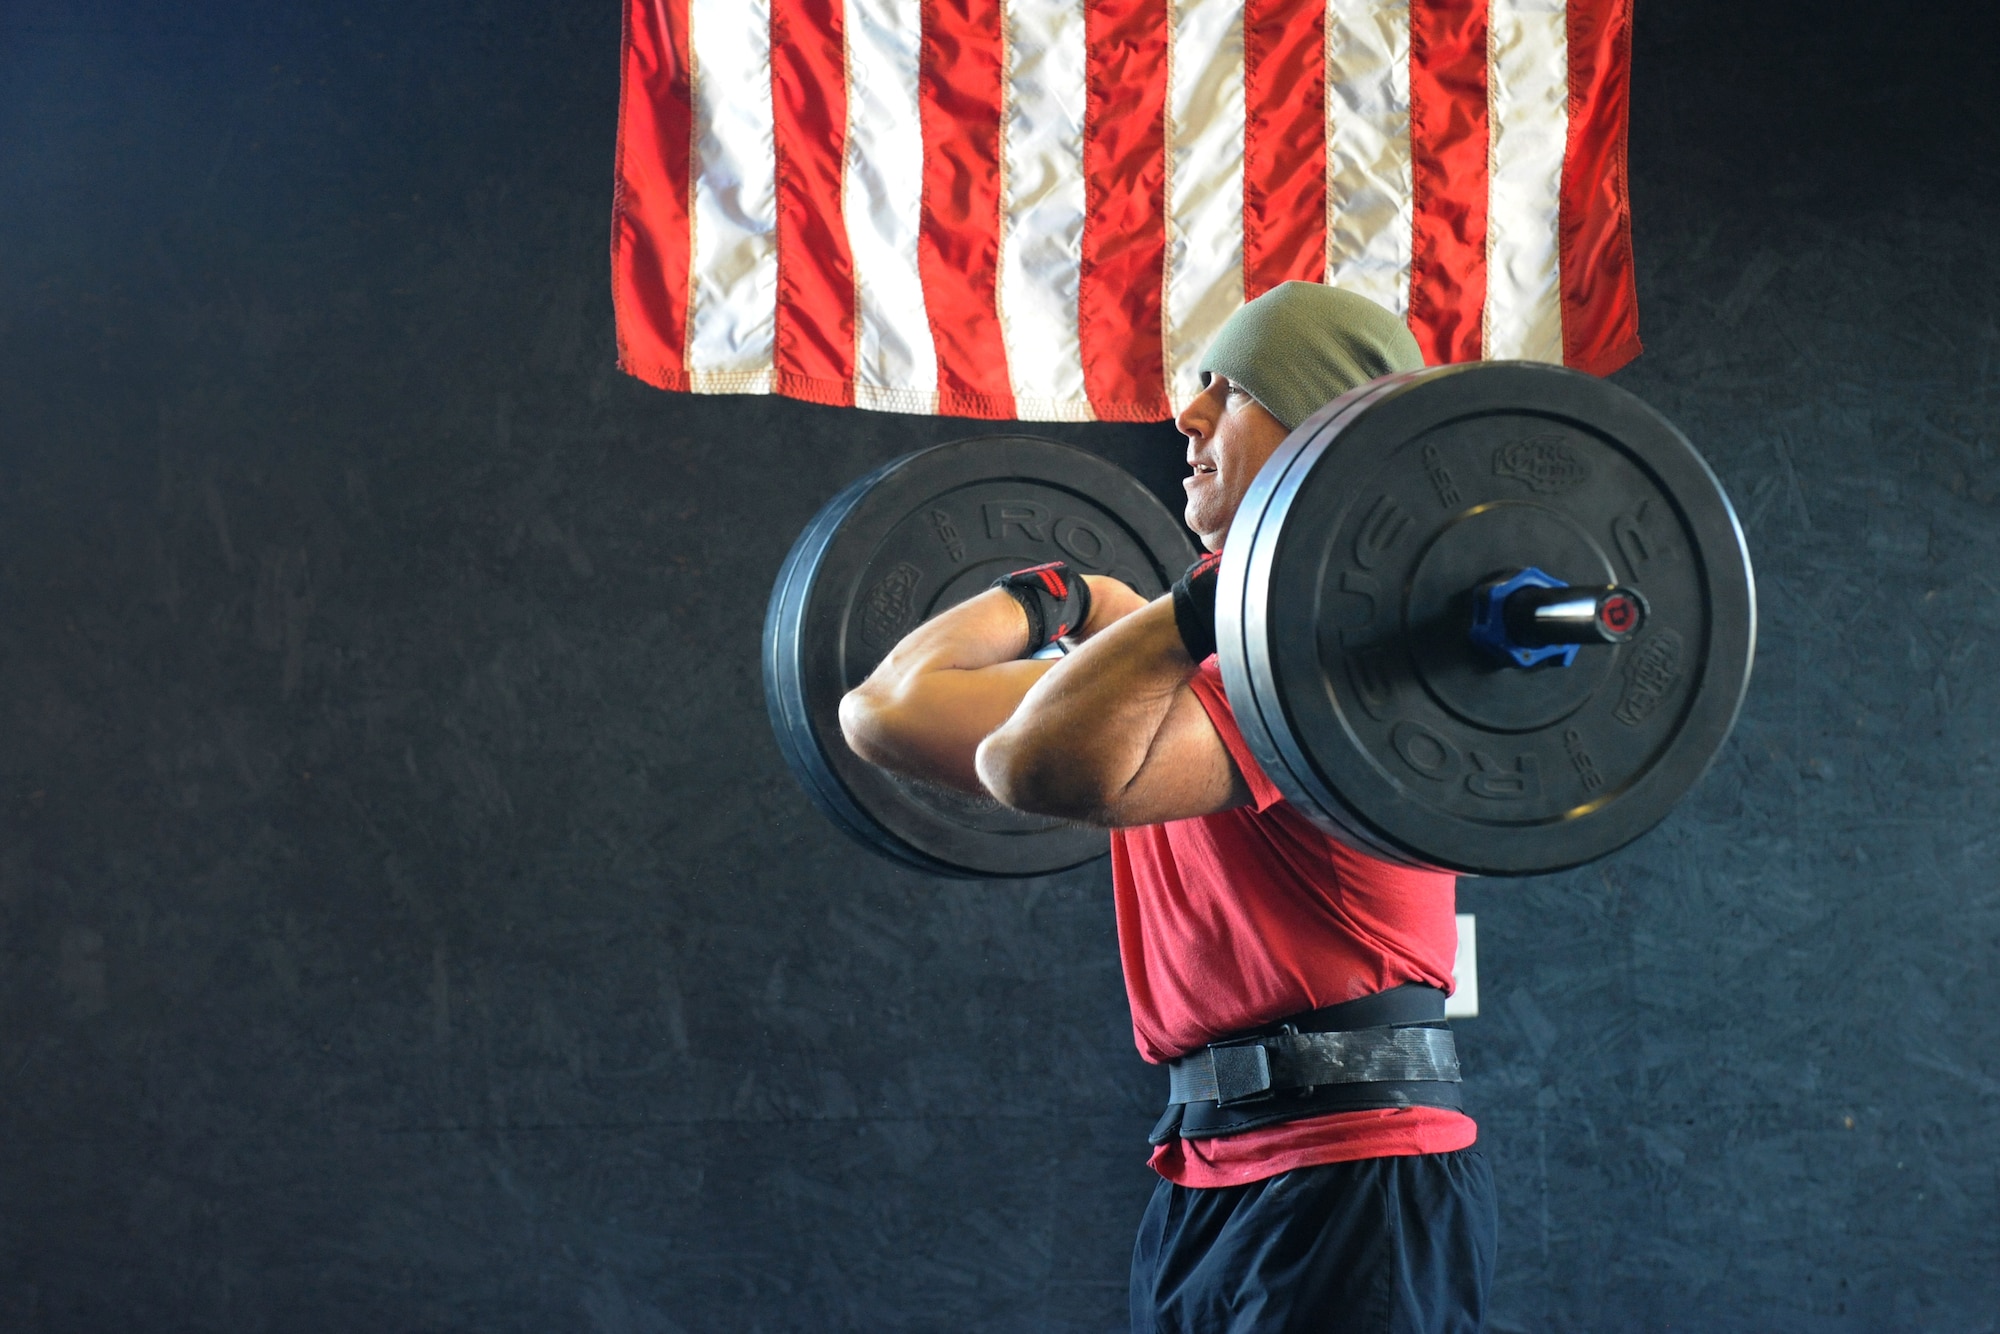 Tech. Sgt. Clayton Morris, 436th Operations Support Squadron Air Crew Flight Equipment NCO in charge of technician training, performs a clean and jerk during the first event of the Eastern Shore Affiliate Challenge Oct. 17, 2015, in Georgetown, Del. Morris won second place in the scaled men’s division of the competition. (U.S. Air Force photo/Staff Sgt. Elizabeth Morris)